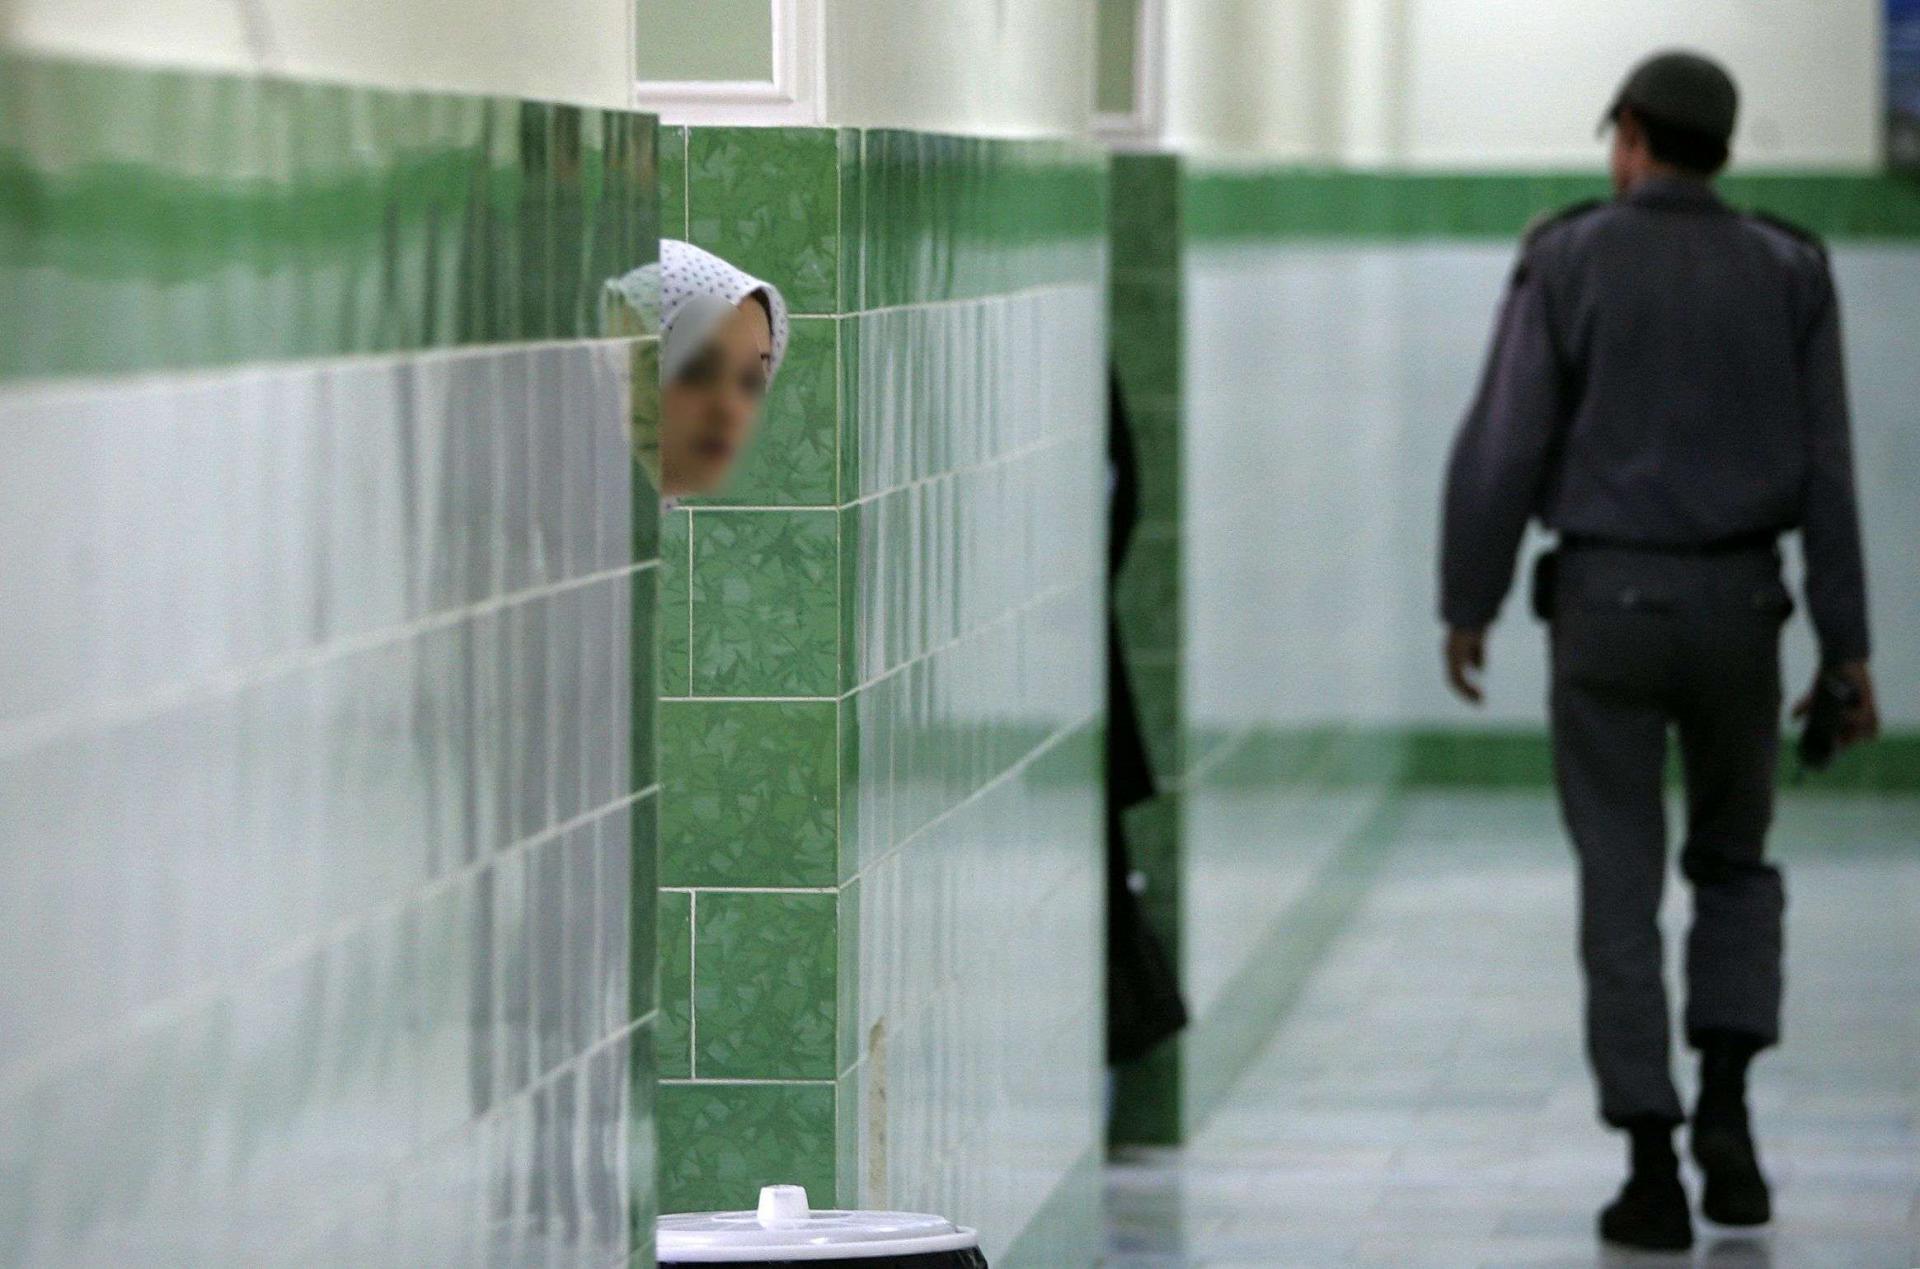 An Iranian inmate peers from behind a wall as a guard walks by